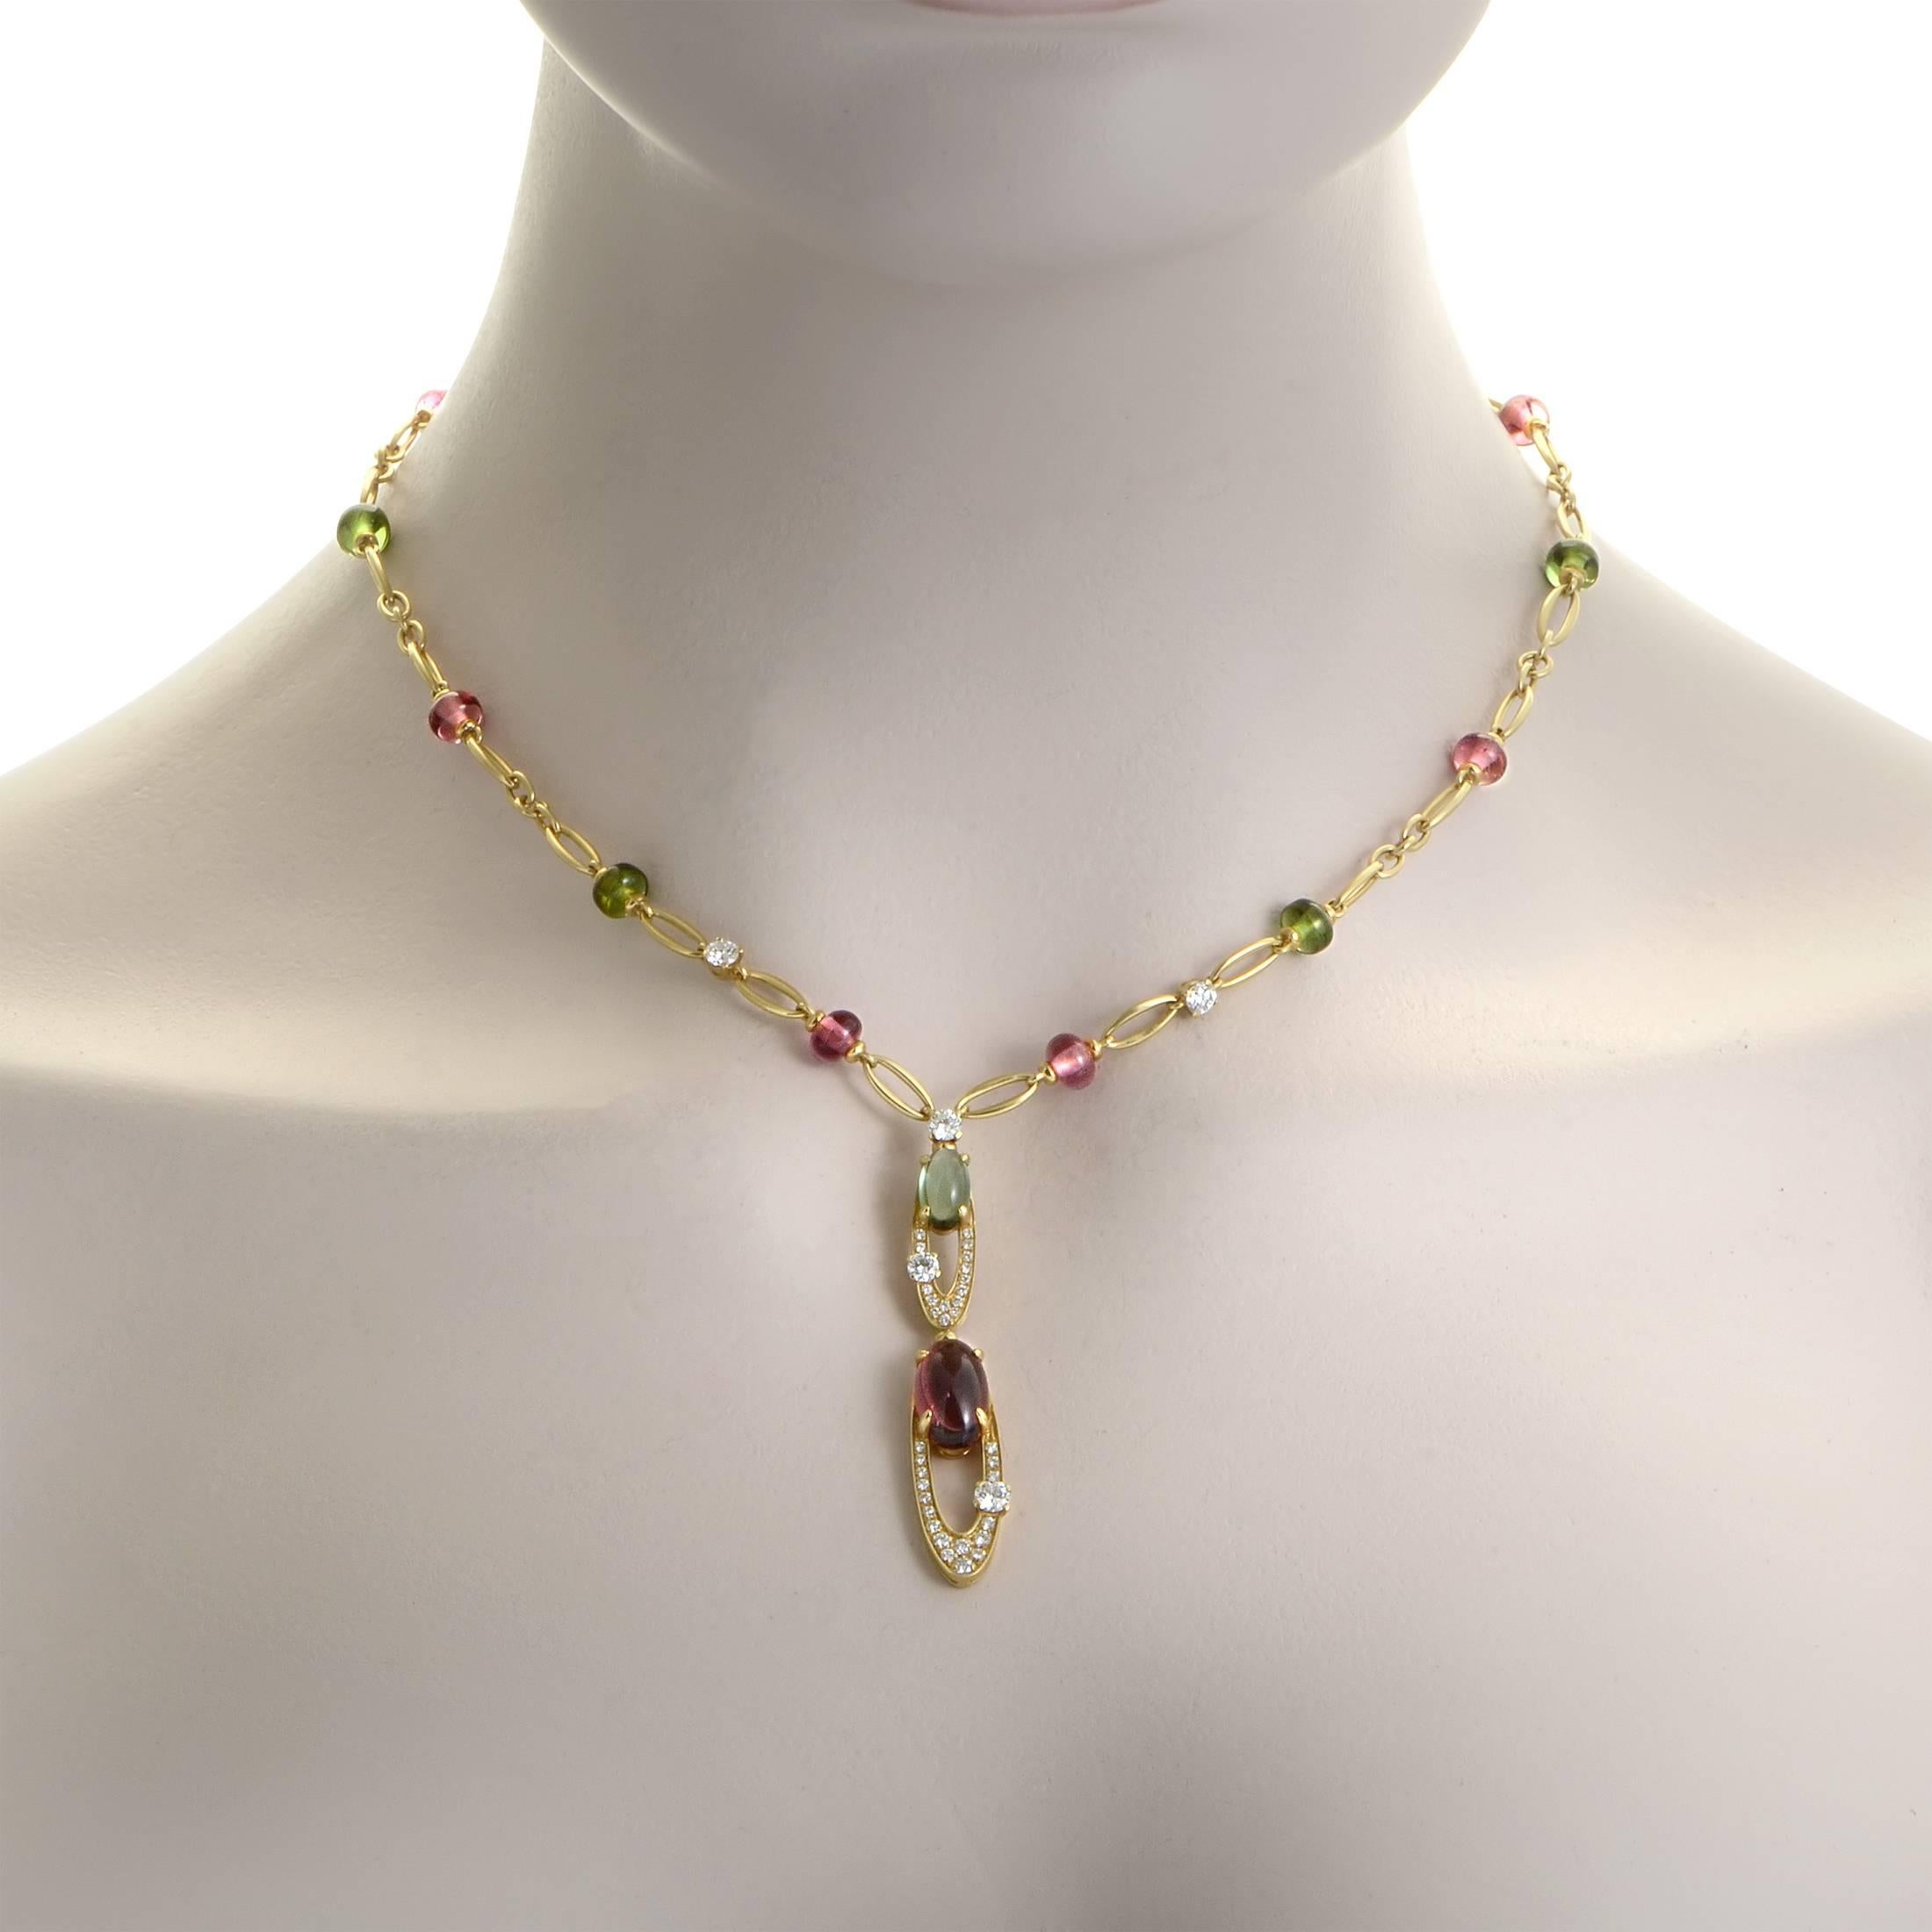 Wonderfully graceful and delightfully feminine, this stunning necklace from Bulgari is made of precious 18K yellow gold embellished with glistening diamonds weighing in total approximately 2.00 carats as well as nifty pink and green